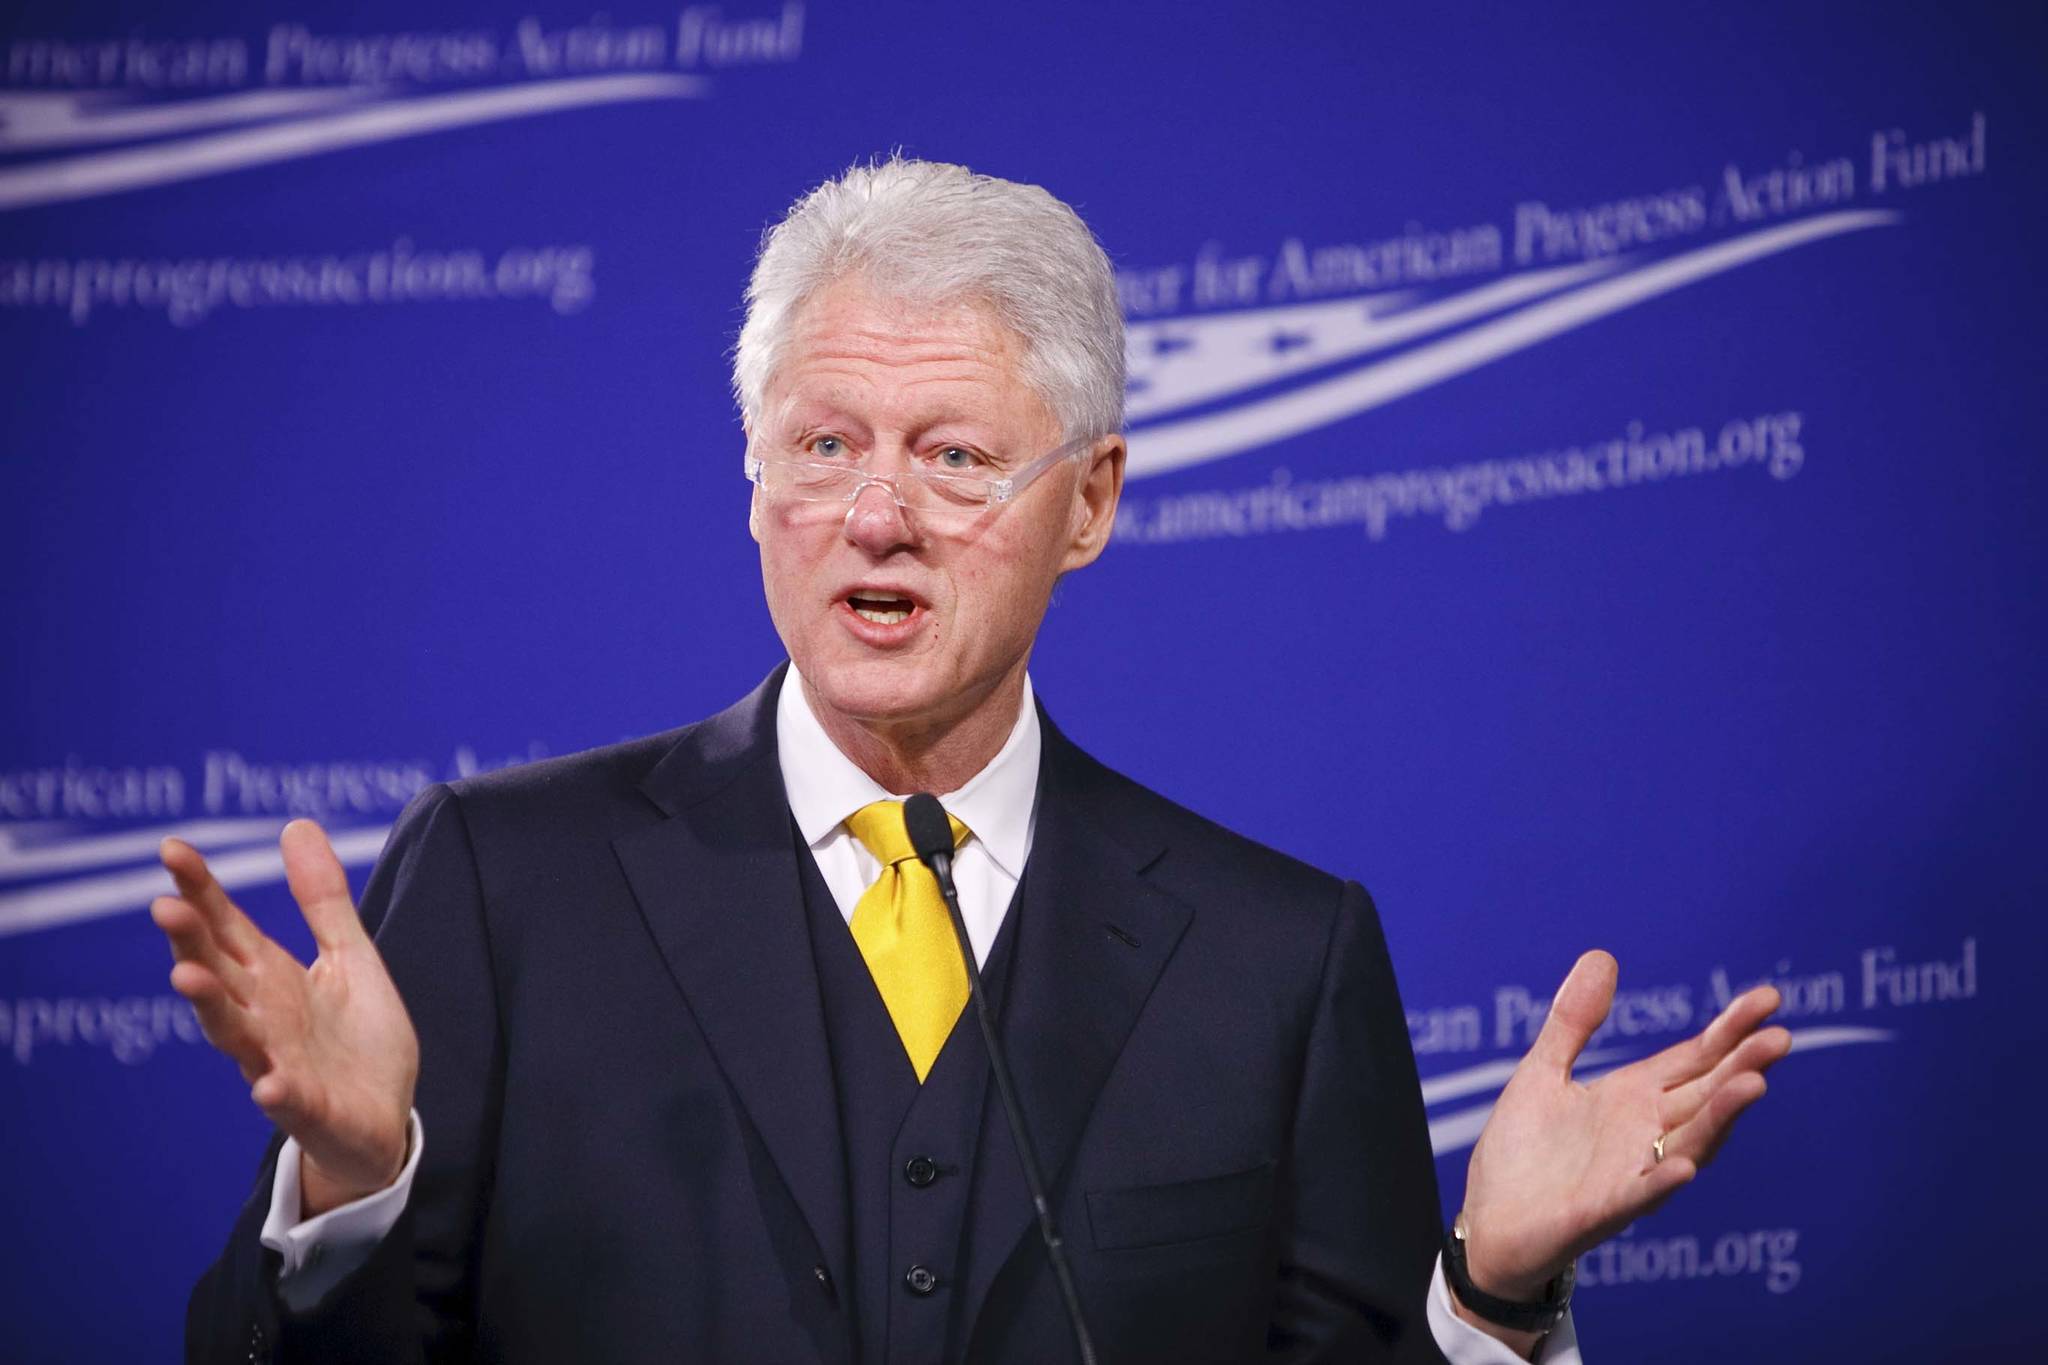 Former President Bill Clinton will be discussing his first novel in Seattle at the McCaw Hall on June 30. Photo courtesy Ralph Alswang/Flickr